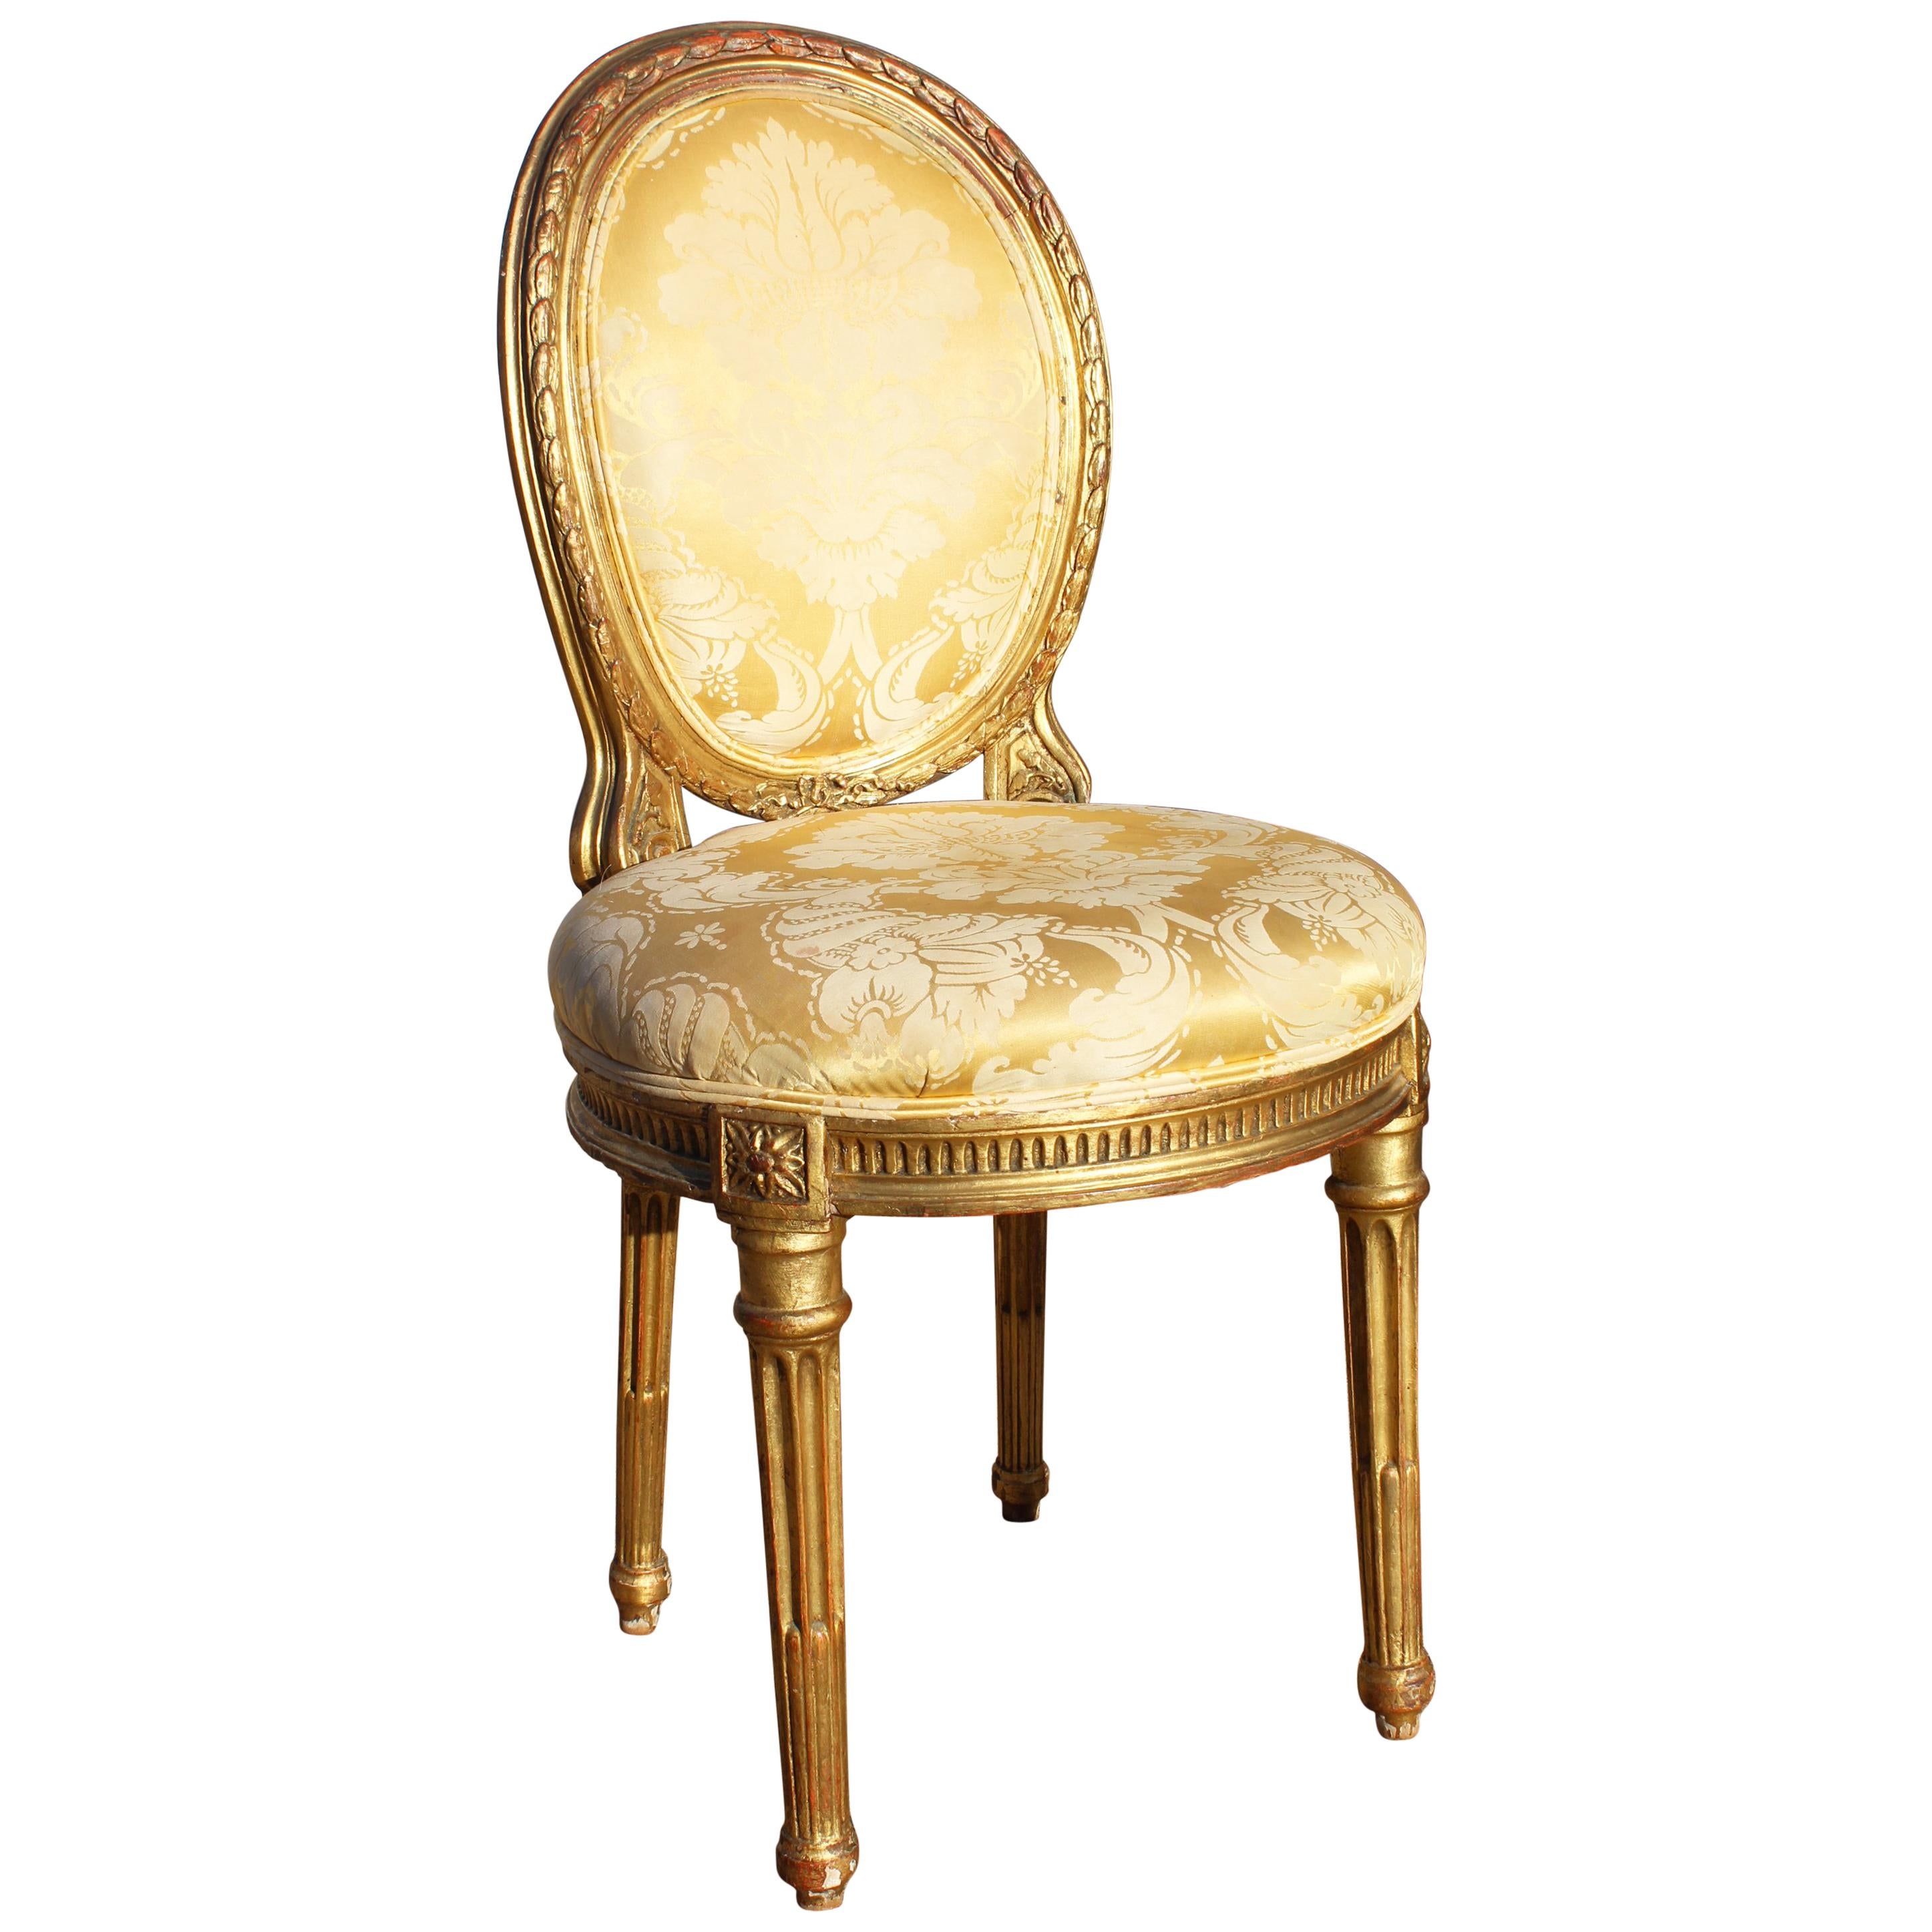 19th Century French Neoclassical Upholstered Chair